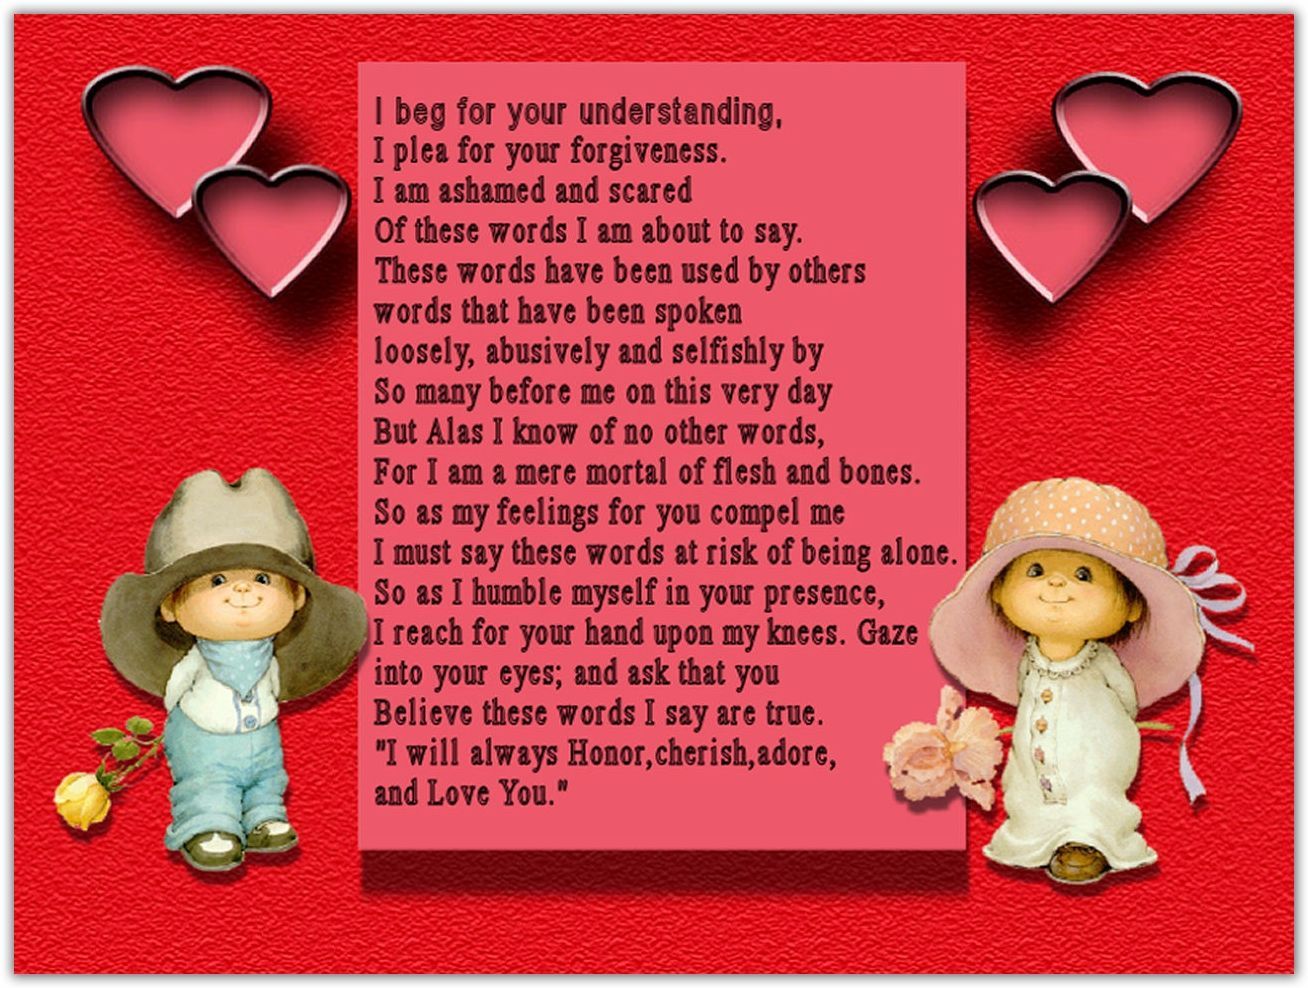 valentines day poems for her